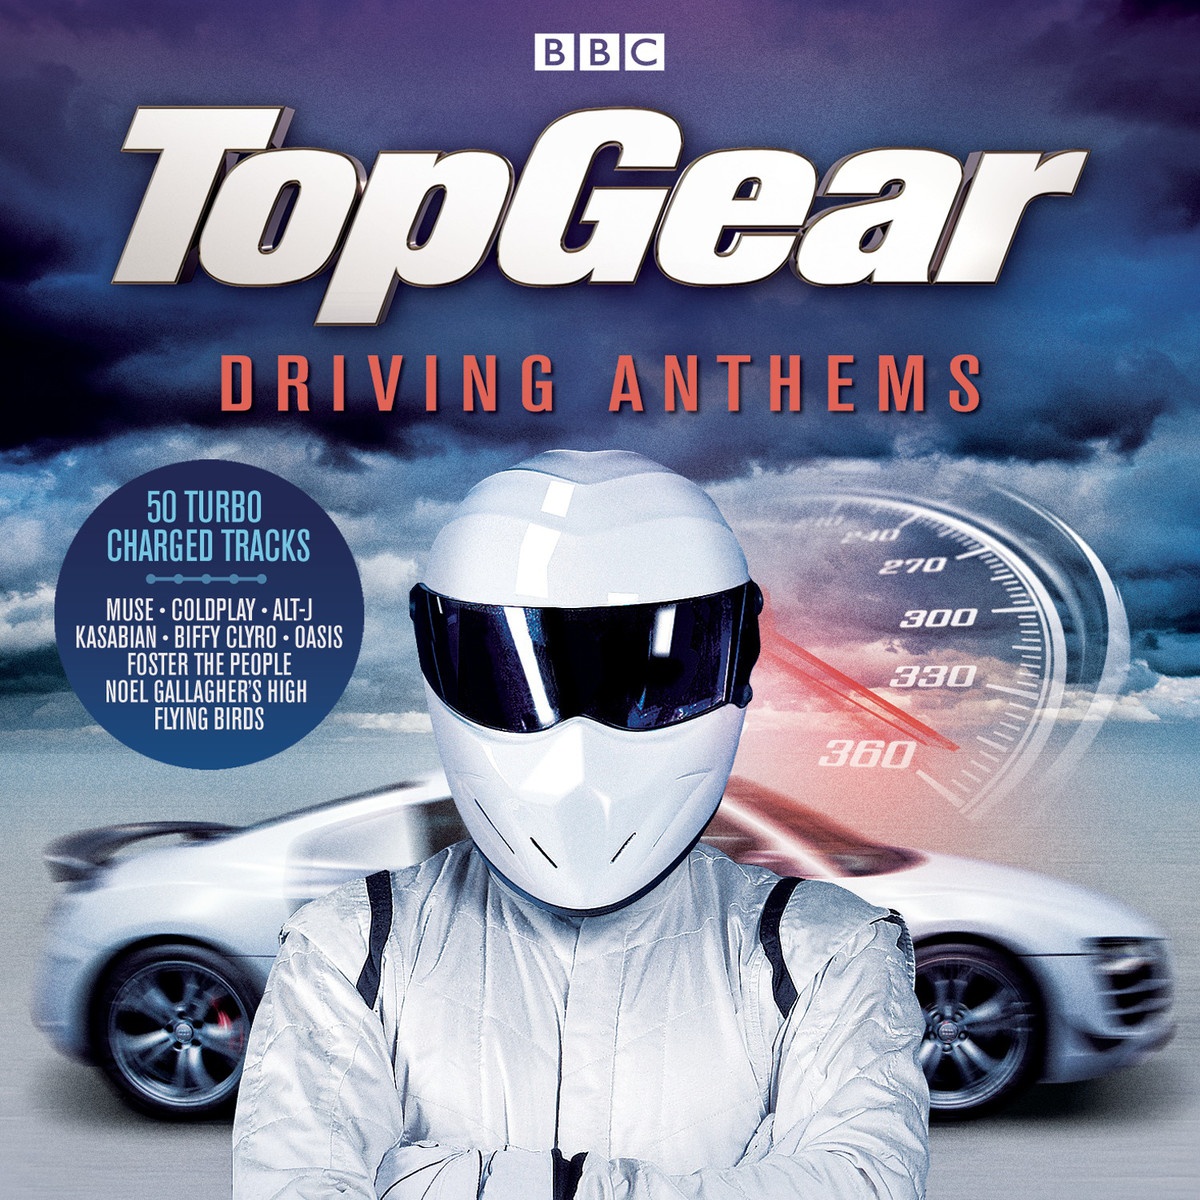 Top Gear Driving Anthems